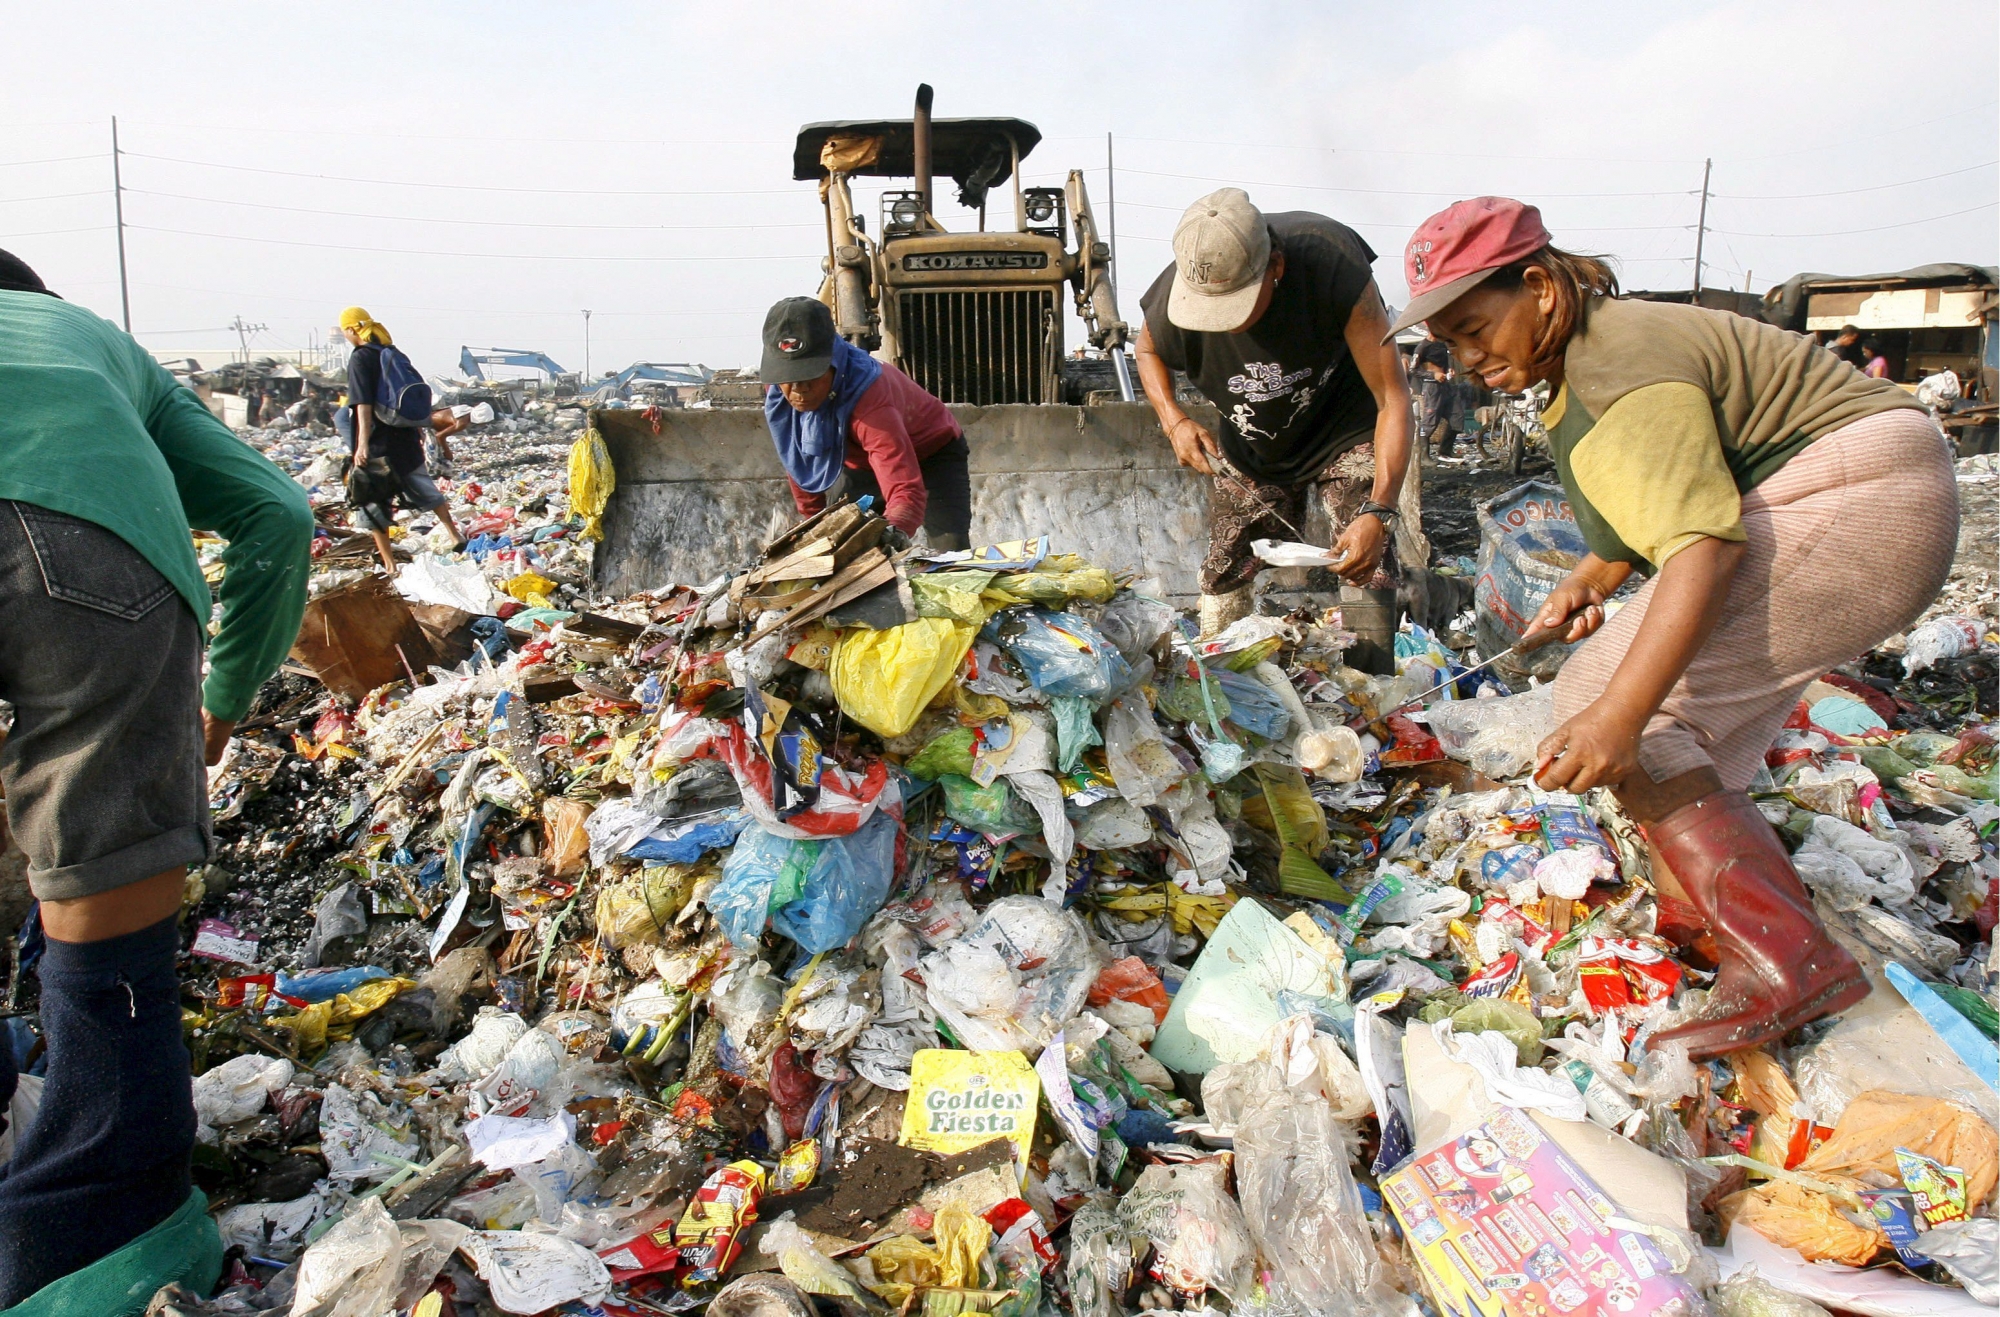 Filipino scavengers collect sacks of recyclable materials at Pier 18 trash dumpsite in Manila, Philippines, 30 July 2007. The  Philippines is hosting the 40th ASEAN Ministerial Meeting, 14th Regional Forum.  ASEAN is expected to address the problems of open dumpsite and nagging issue of poverty when the leaders meet in Singapore in November under the theme 'Energy, Enivonmental, Climate Change and Sustainable Development'.  (KEYSTONE/EPA/FRANCIS R. MALASIG) PHILIPPINES ENVIRONMENT ASEAN